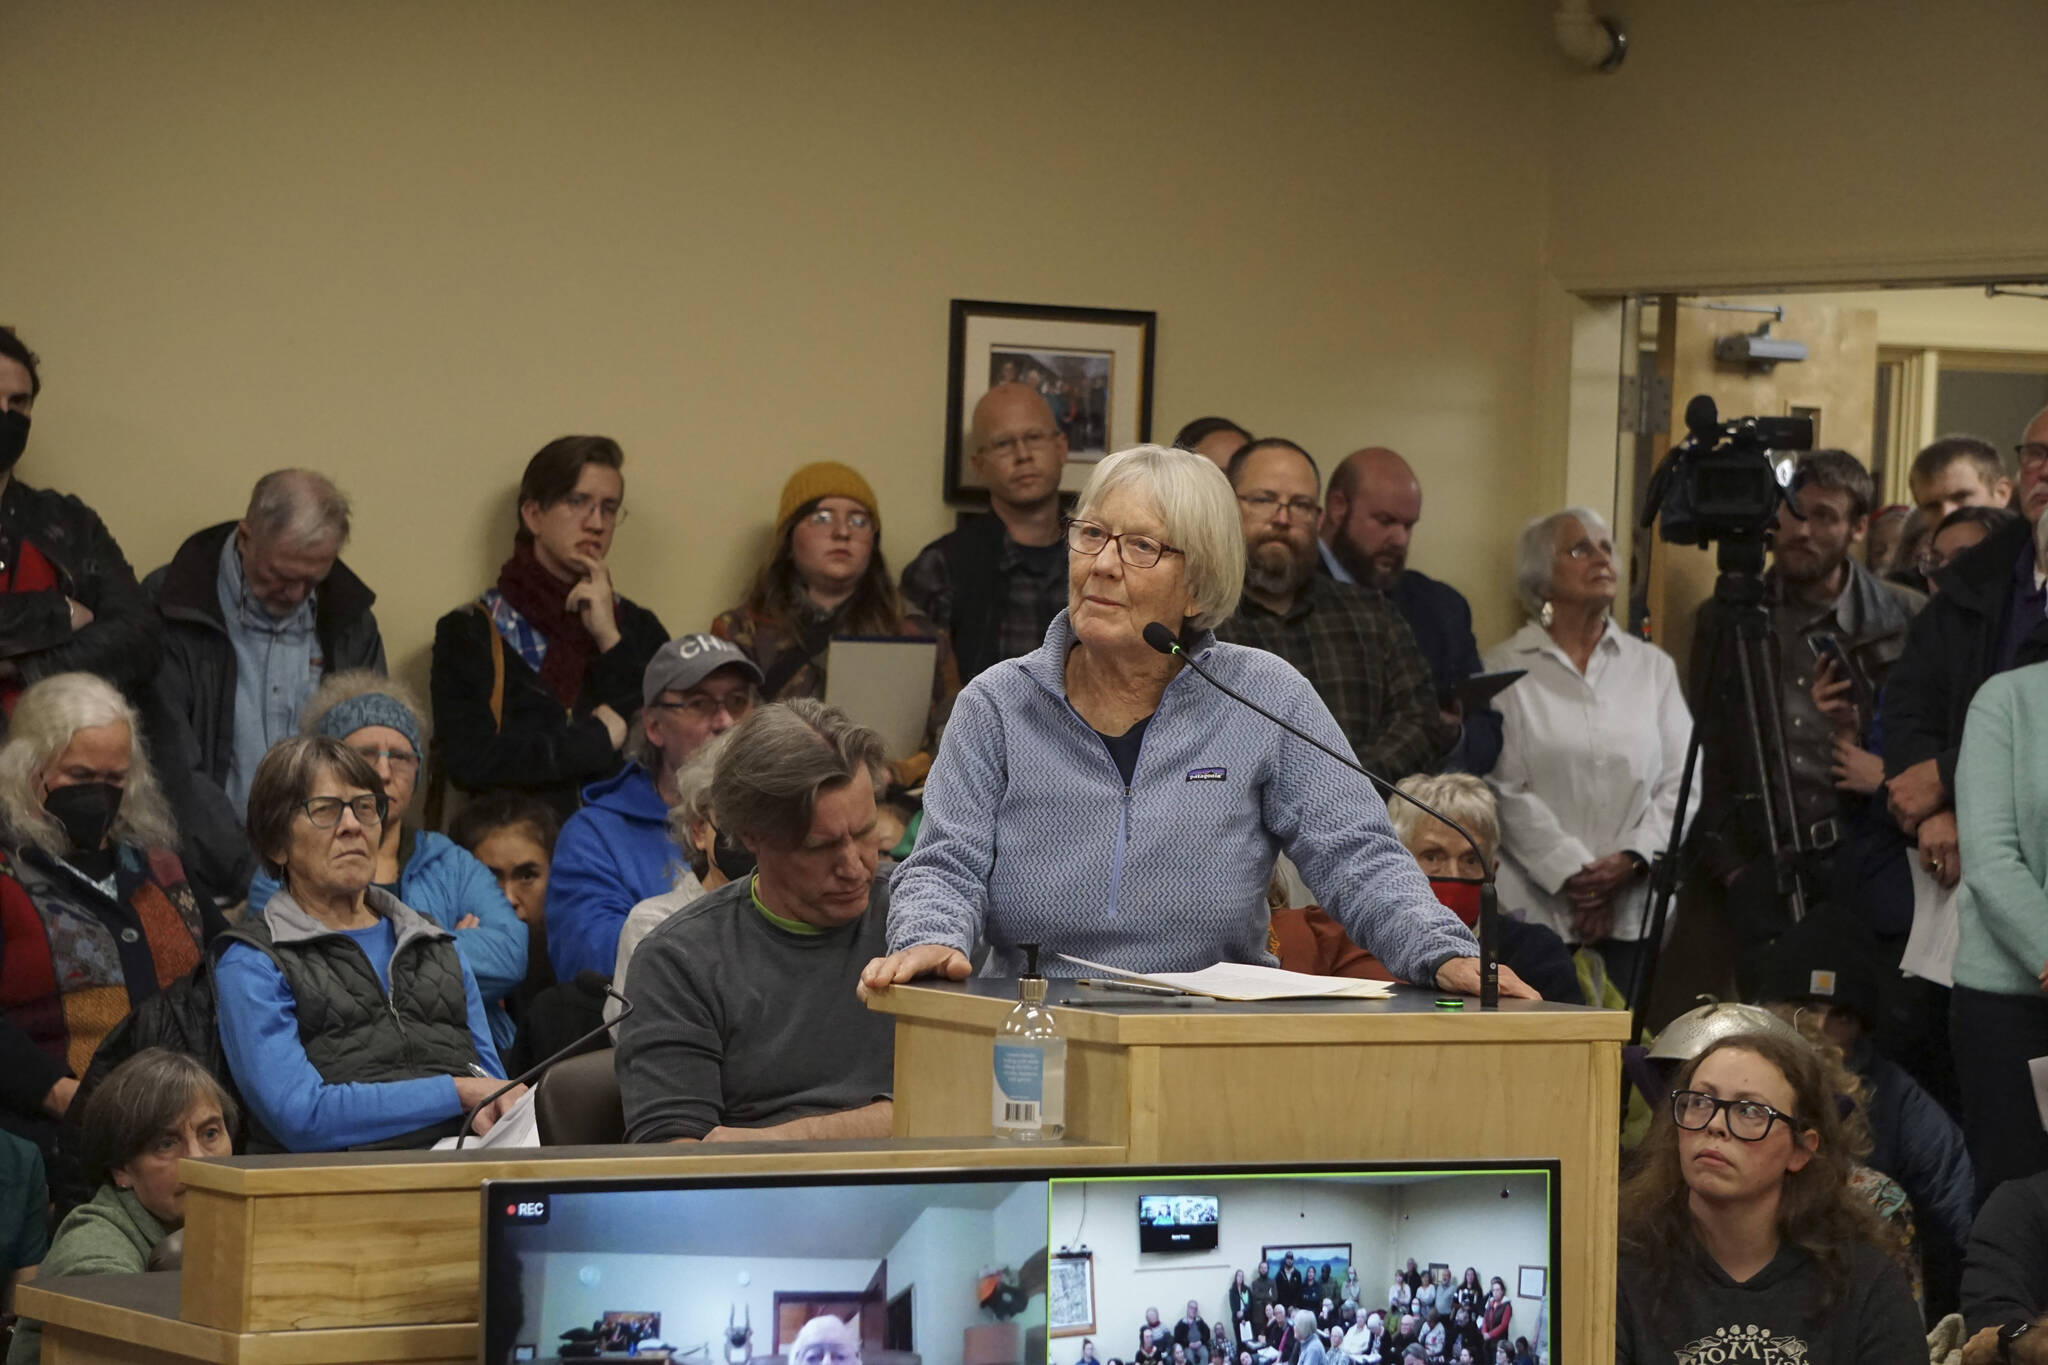 Jane Miles speaks at the meeting of the Library Advisory Board on Nov. 15, 2022, in the Cowles Council Chambers at Homer City Hall in Homer, Alaska. (Photo by Michael Armstrong/Homer News)